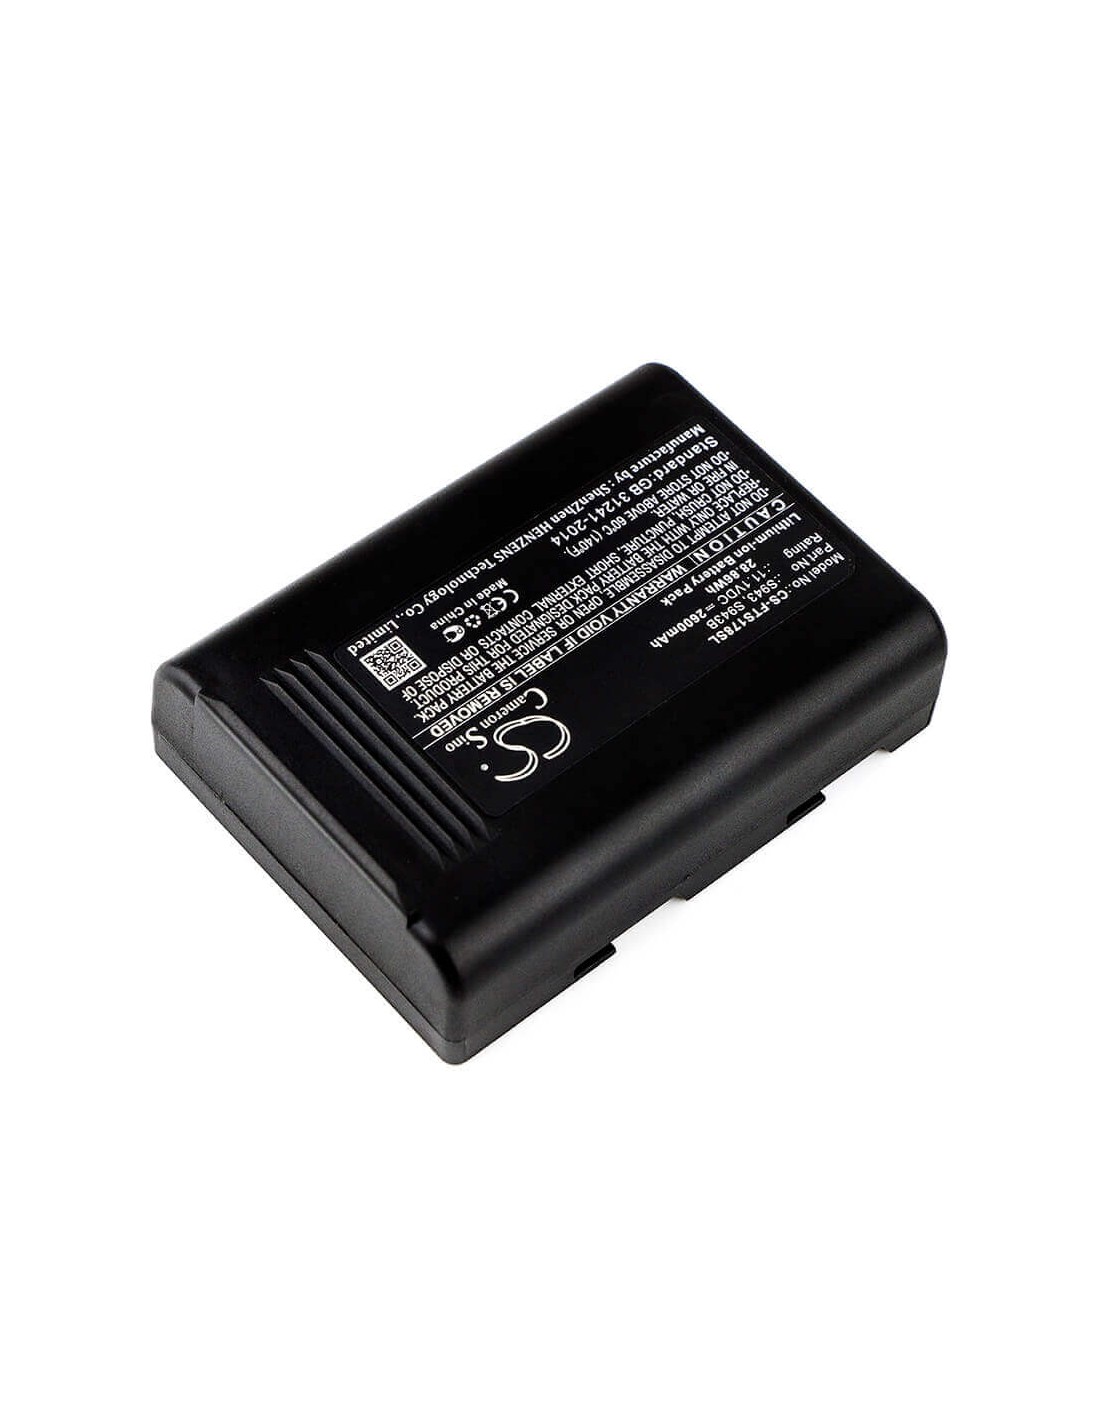 Battery for Fitel S121a, S121m4, S122a 11.1V, 2600mAh - 28.86Wh